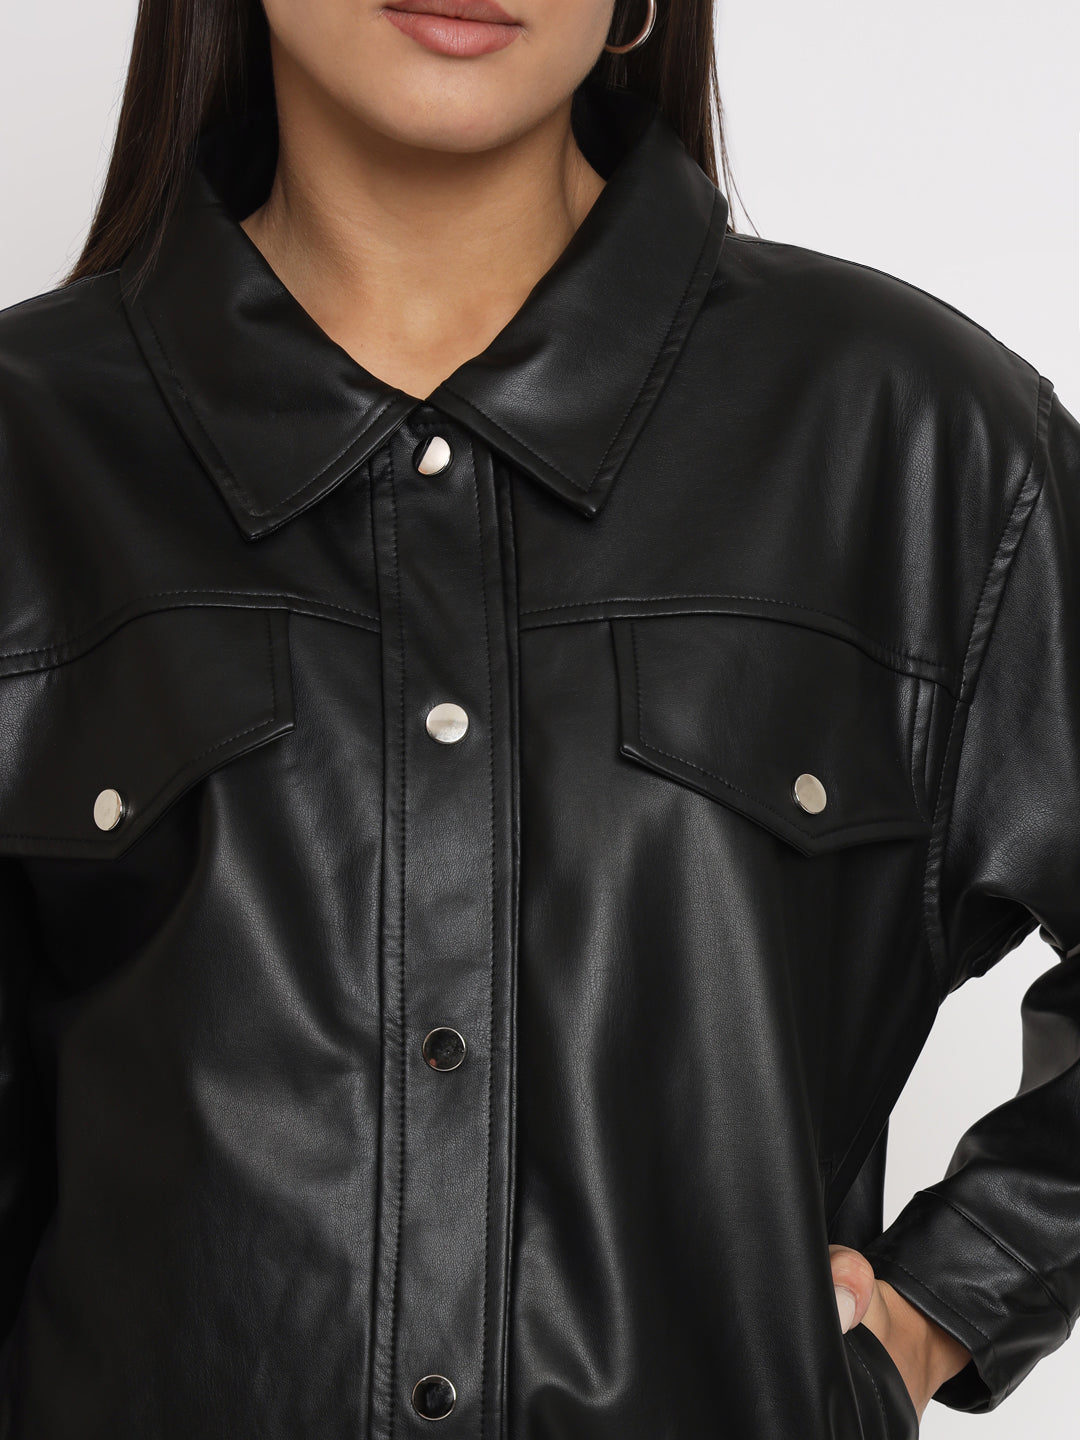 Leather Jacket Outfits & How To Wear a Leather Jacket | Witchery Style